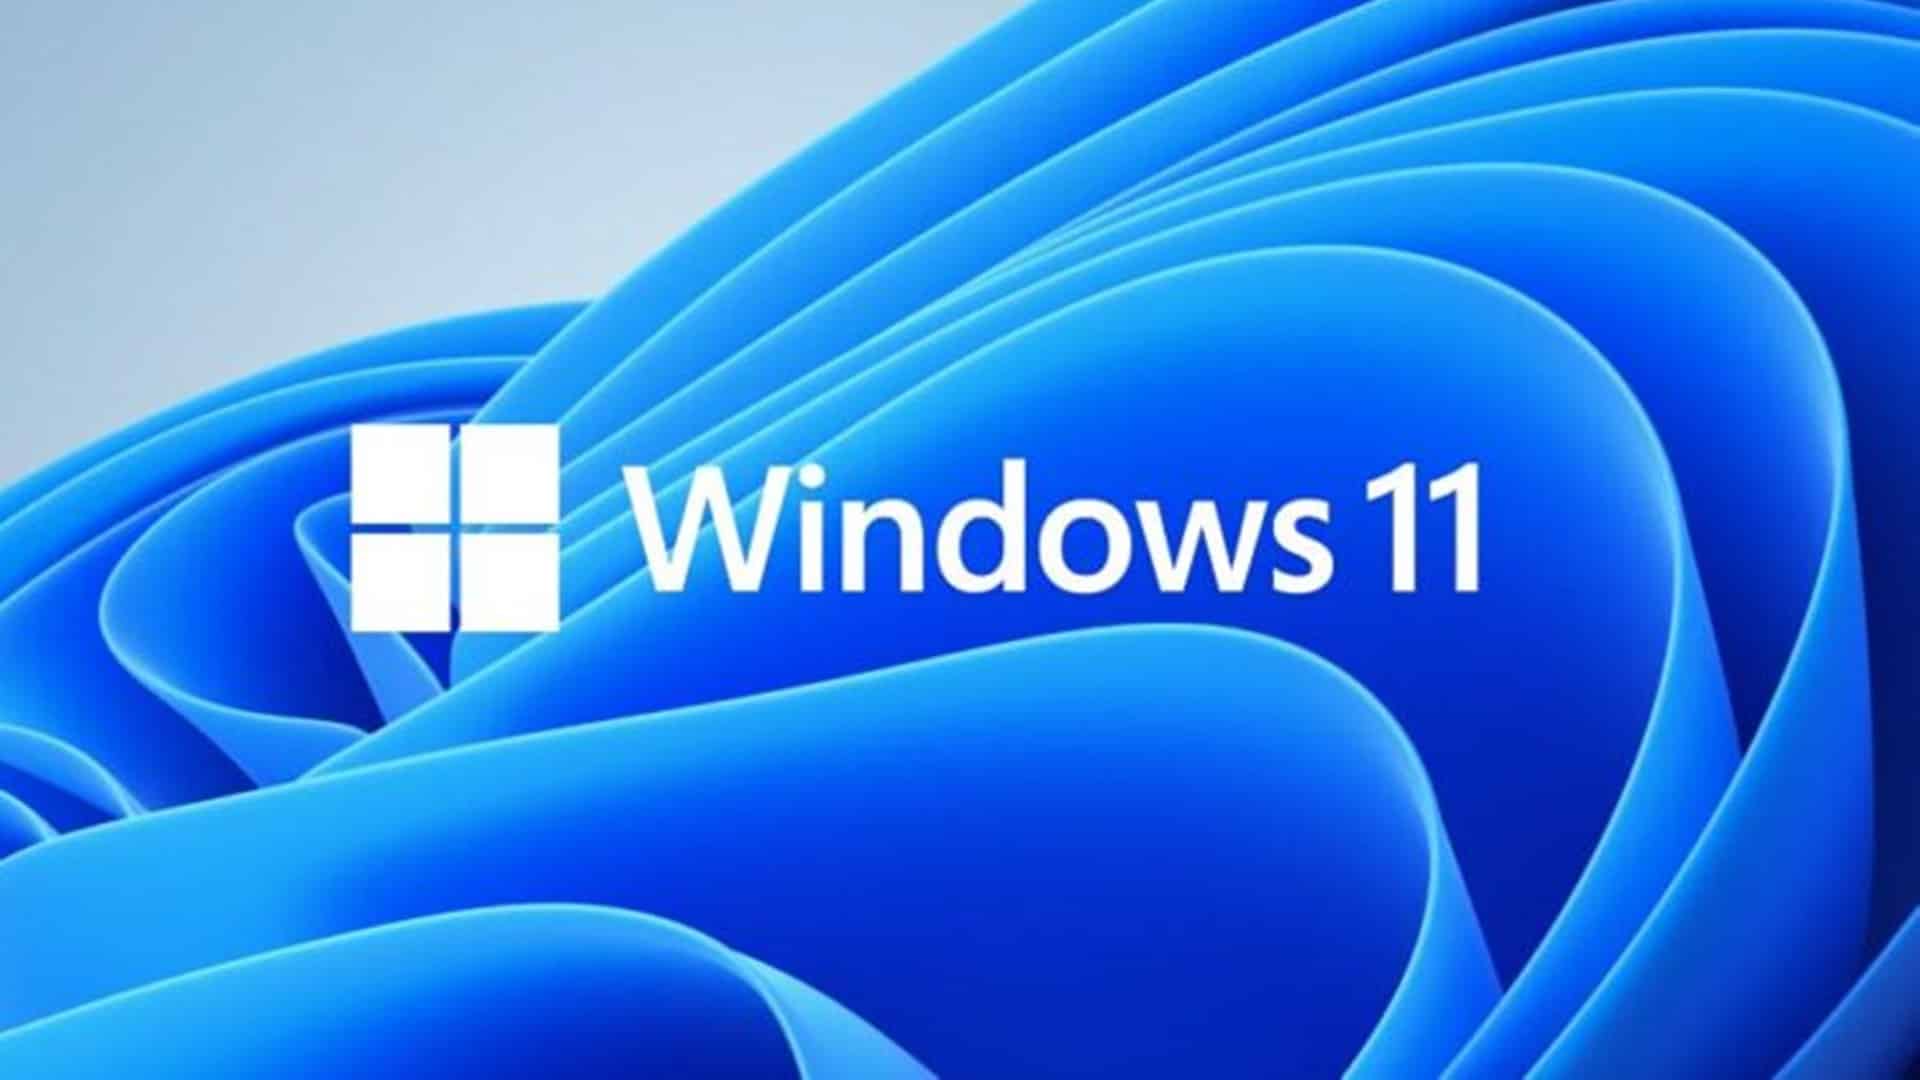 Windows 11 rollout begins: How to upgrade, compatibility, features